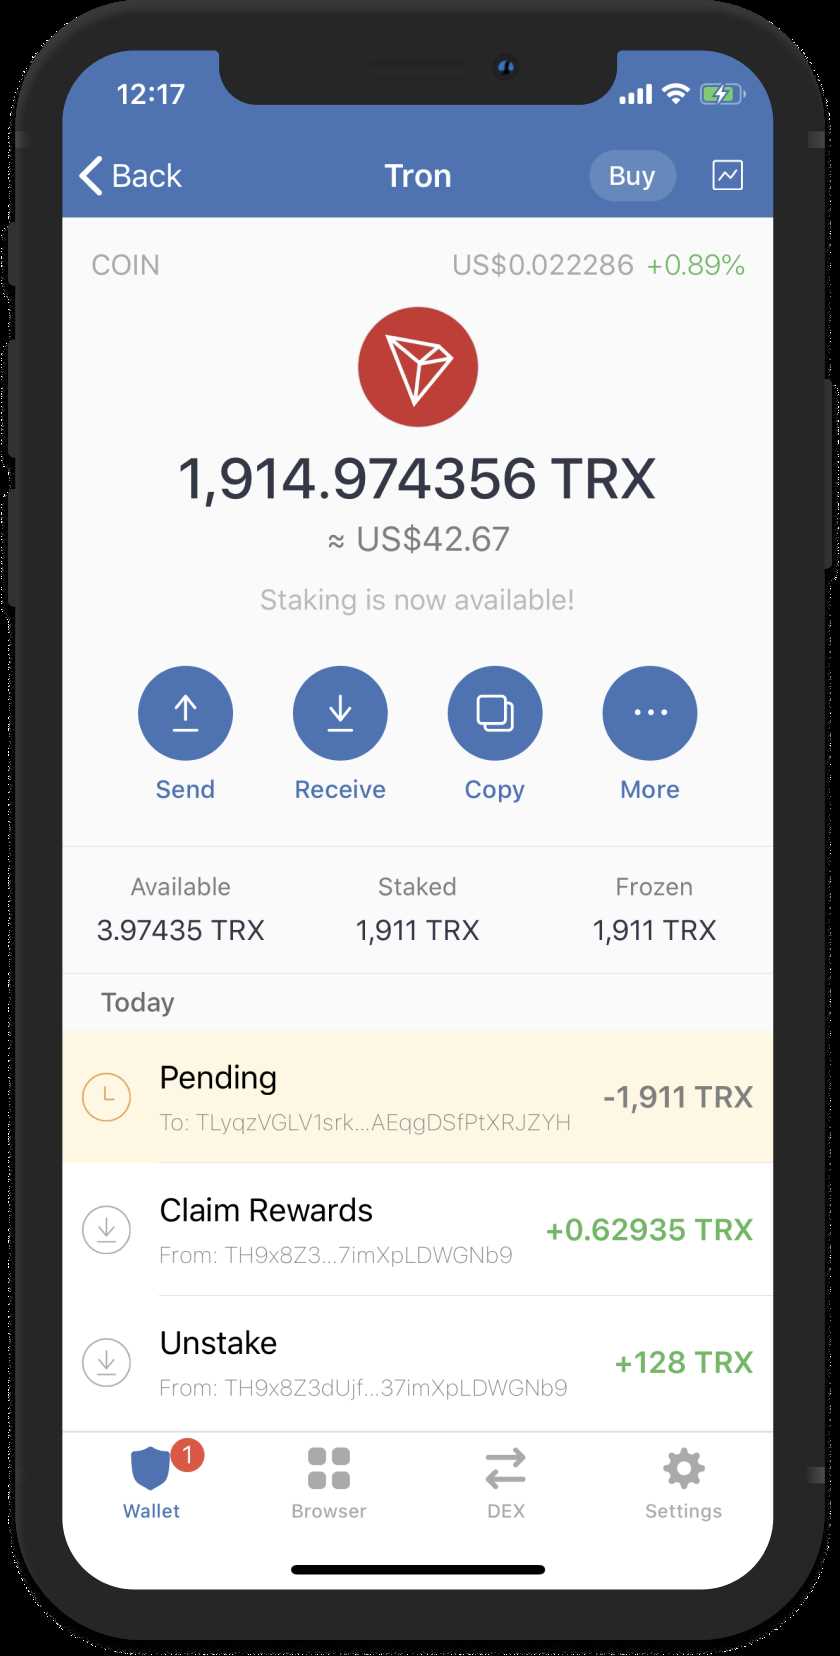 How to Set Up Tronlink Wallet